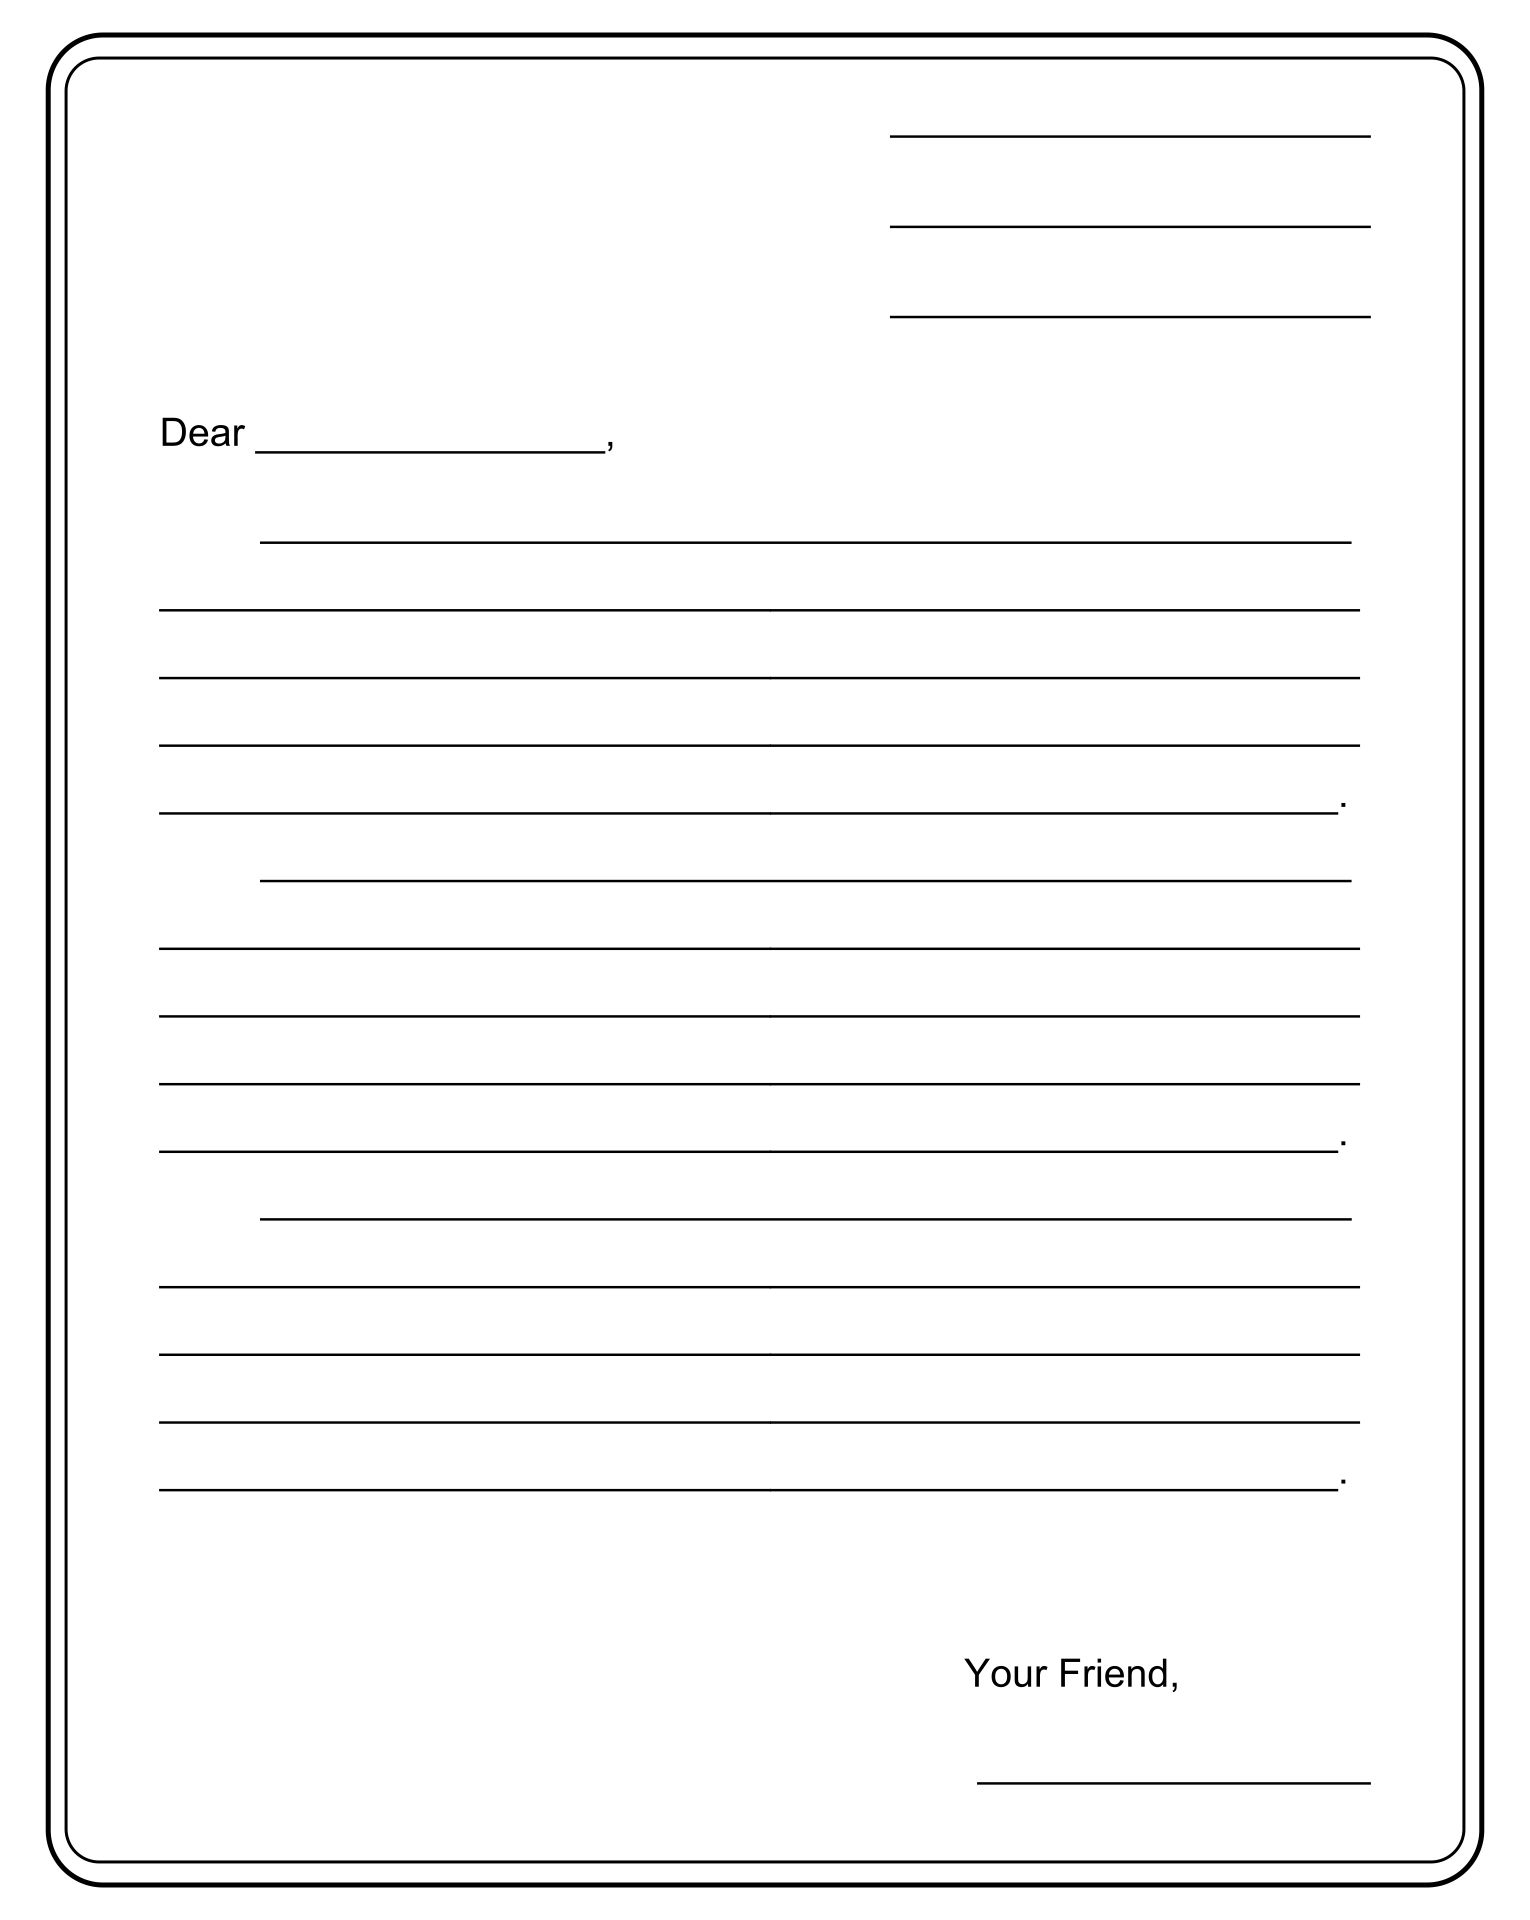 Free Printable Friendly Letter Template Printable Templates Bank2home com